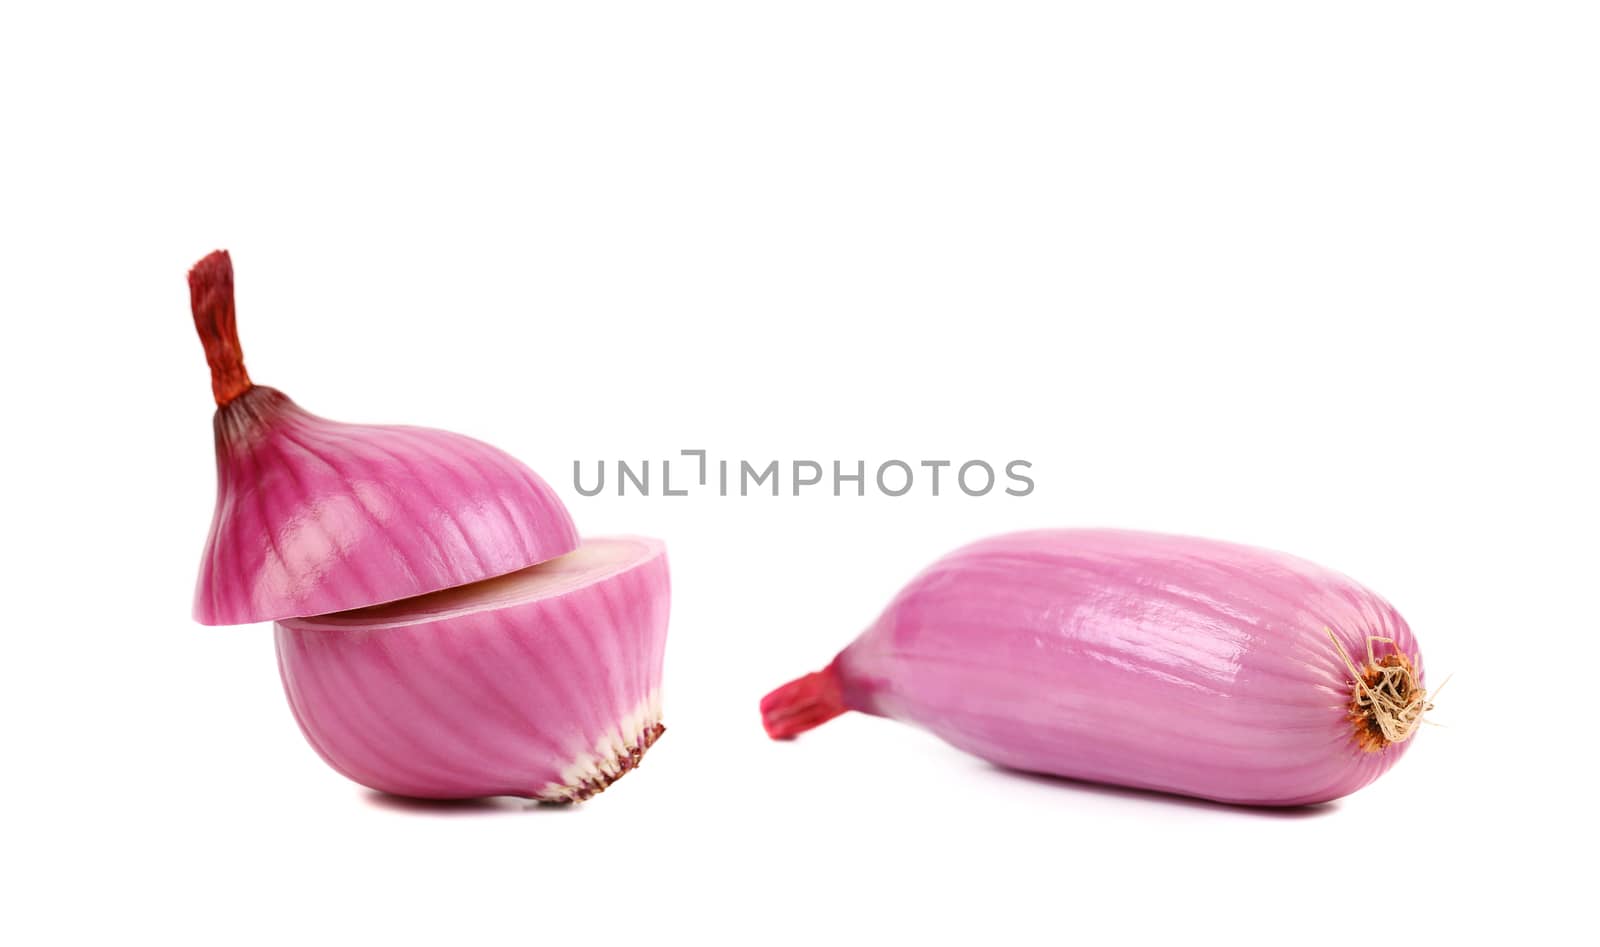 Two chopped and whole violet onion. Isolated on a white background.